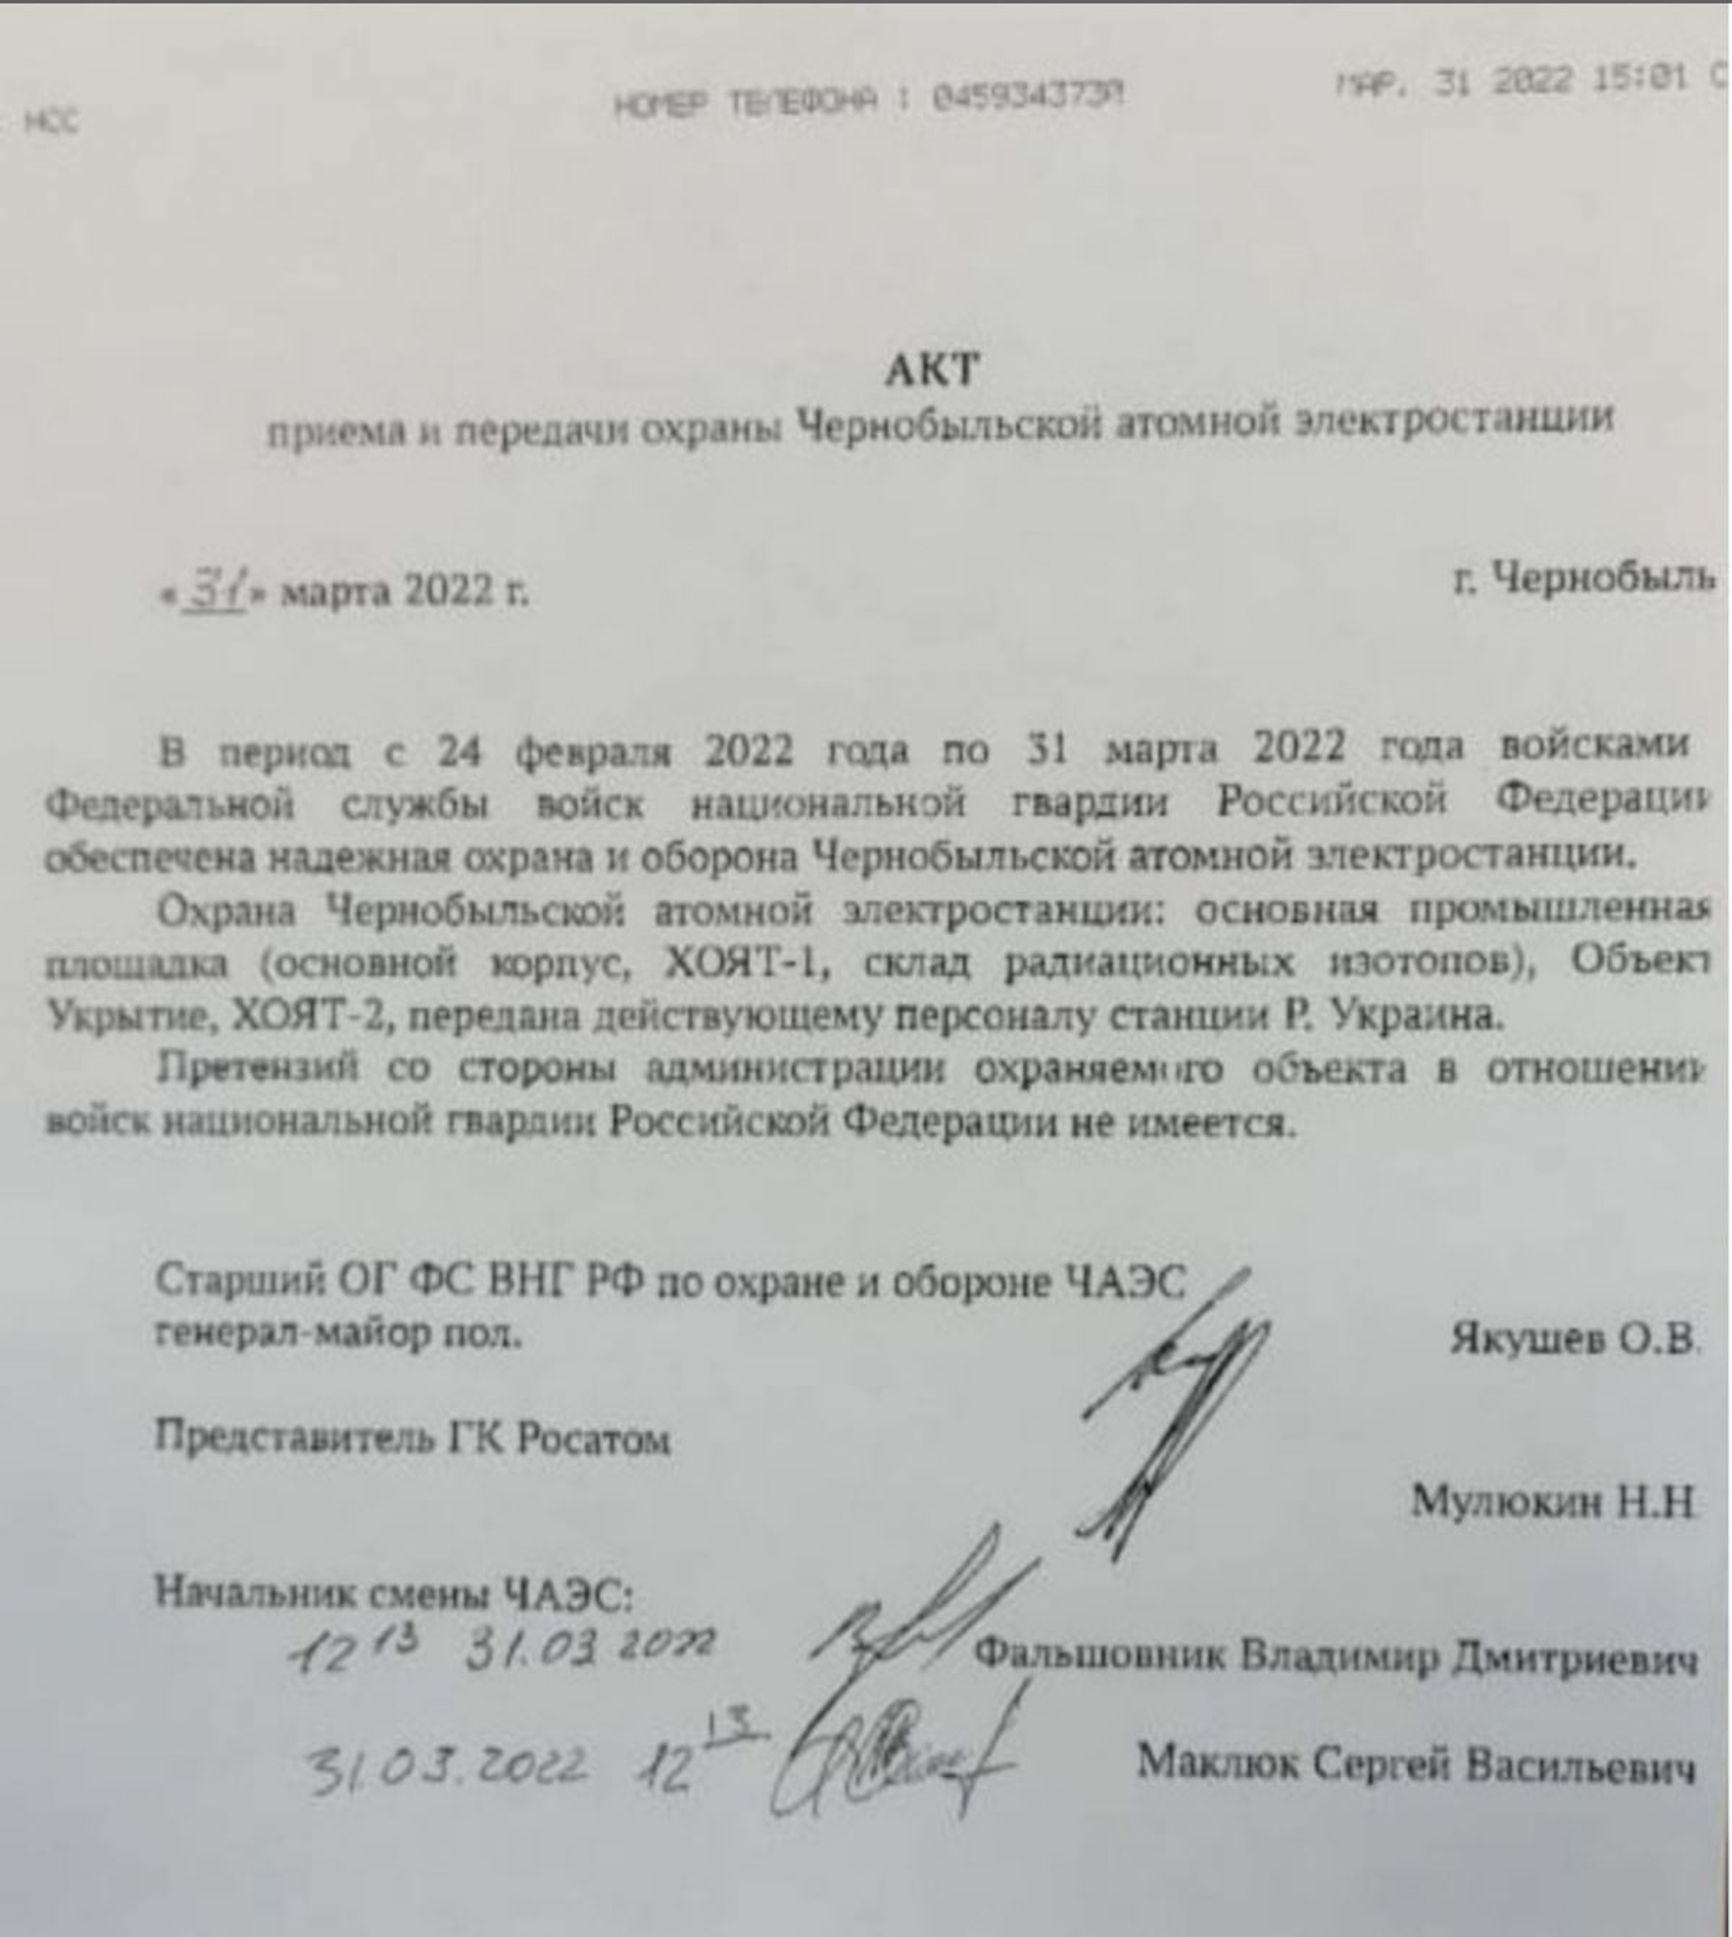 The Russian military forced the Chernobyl employees to sign this document under pressure